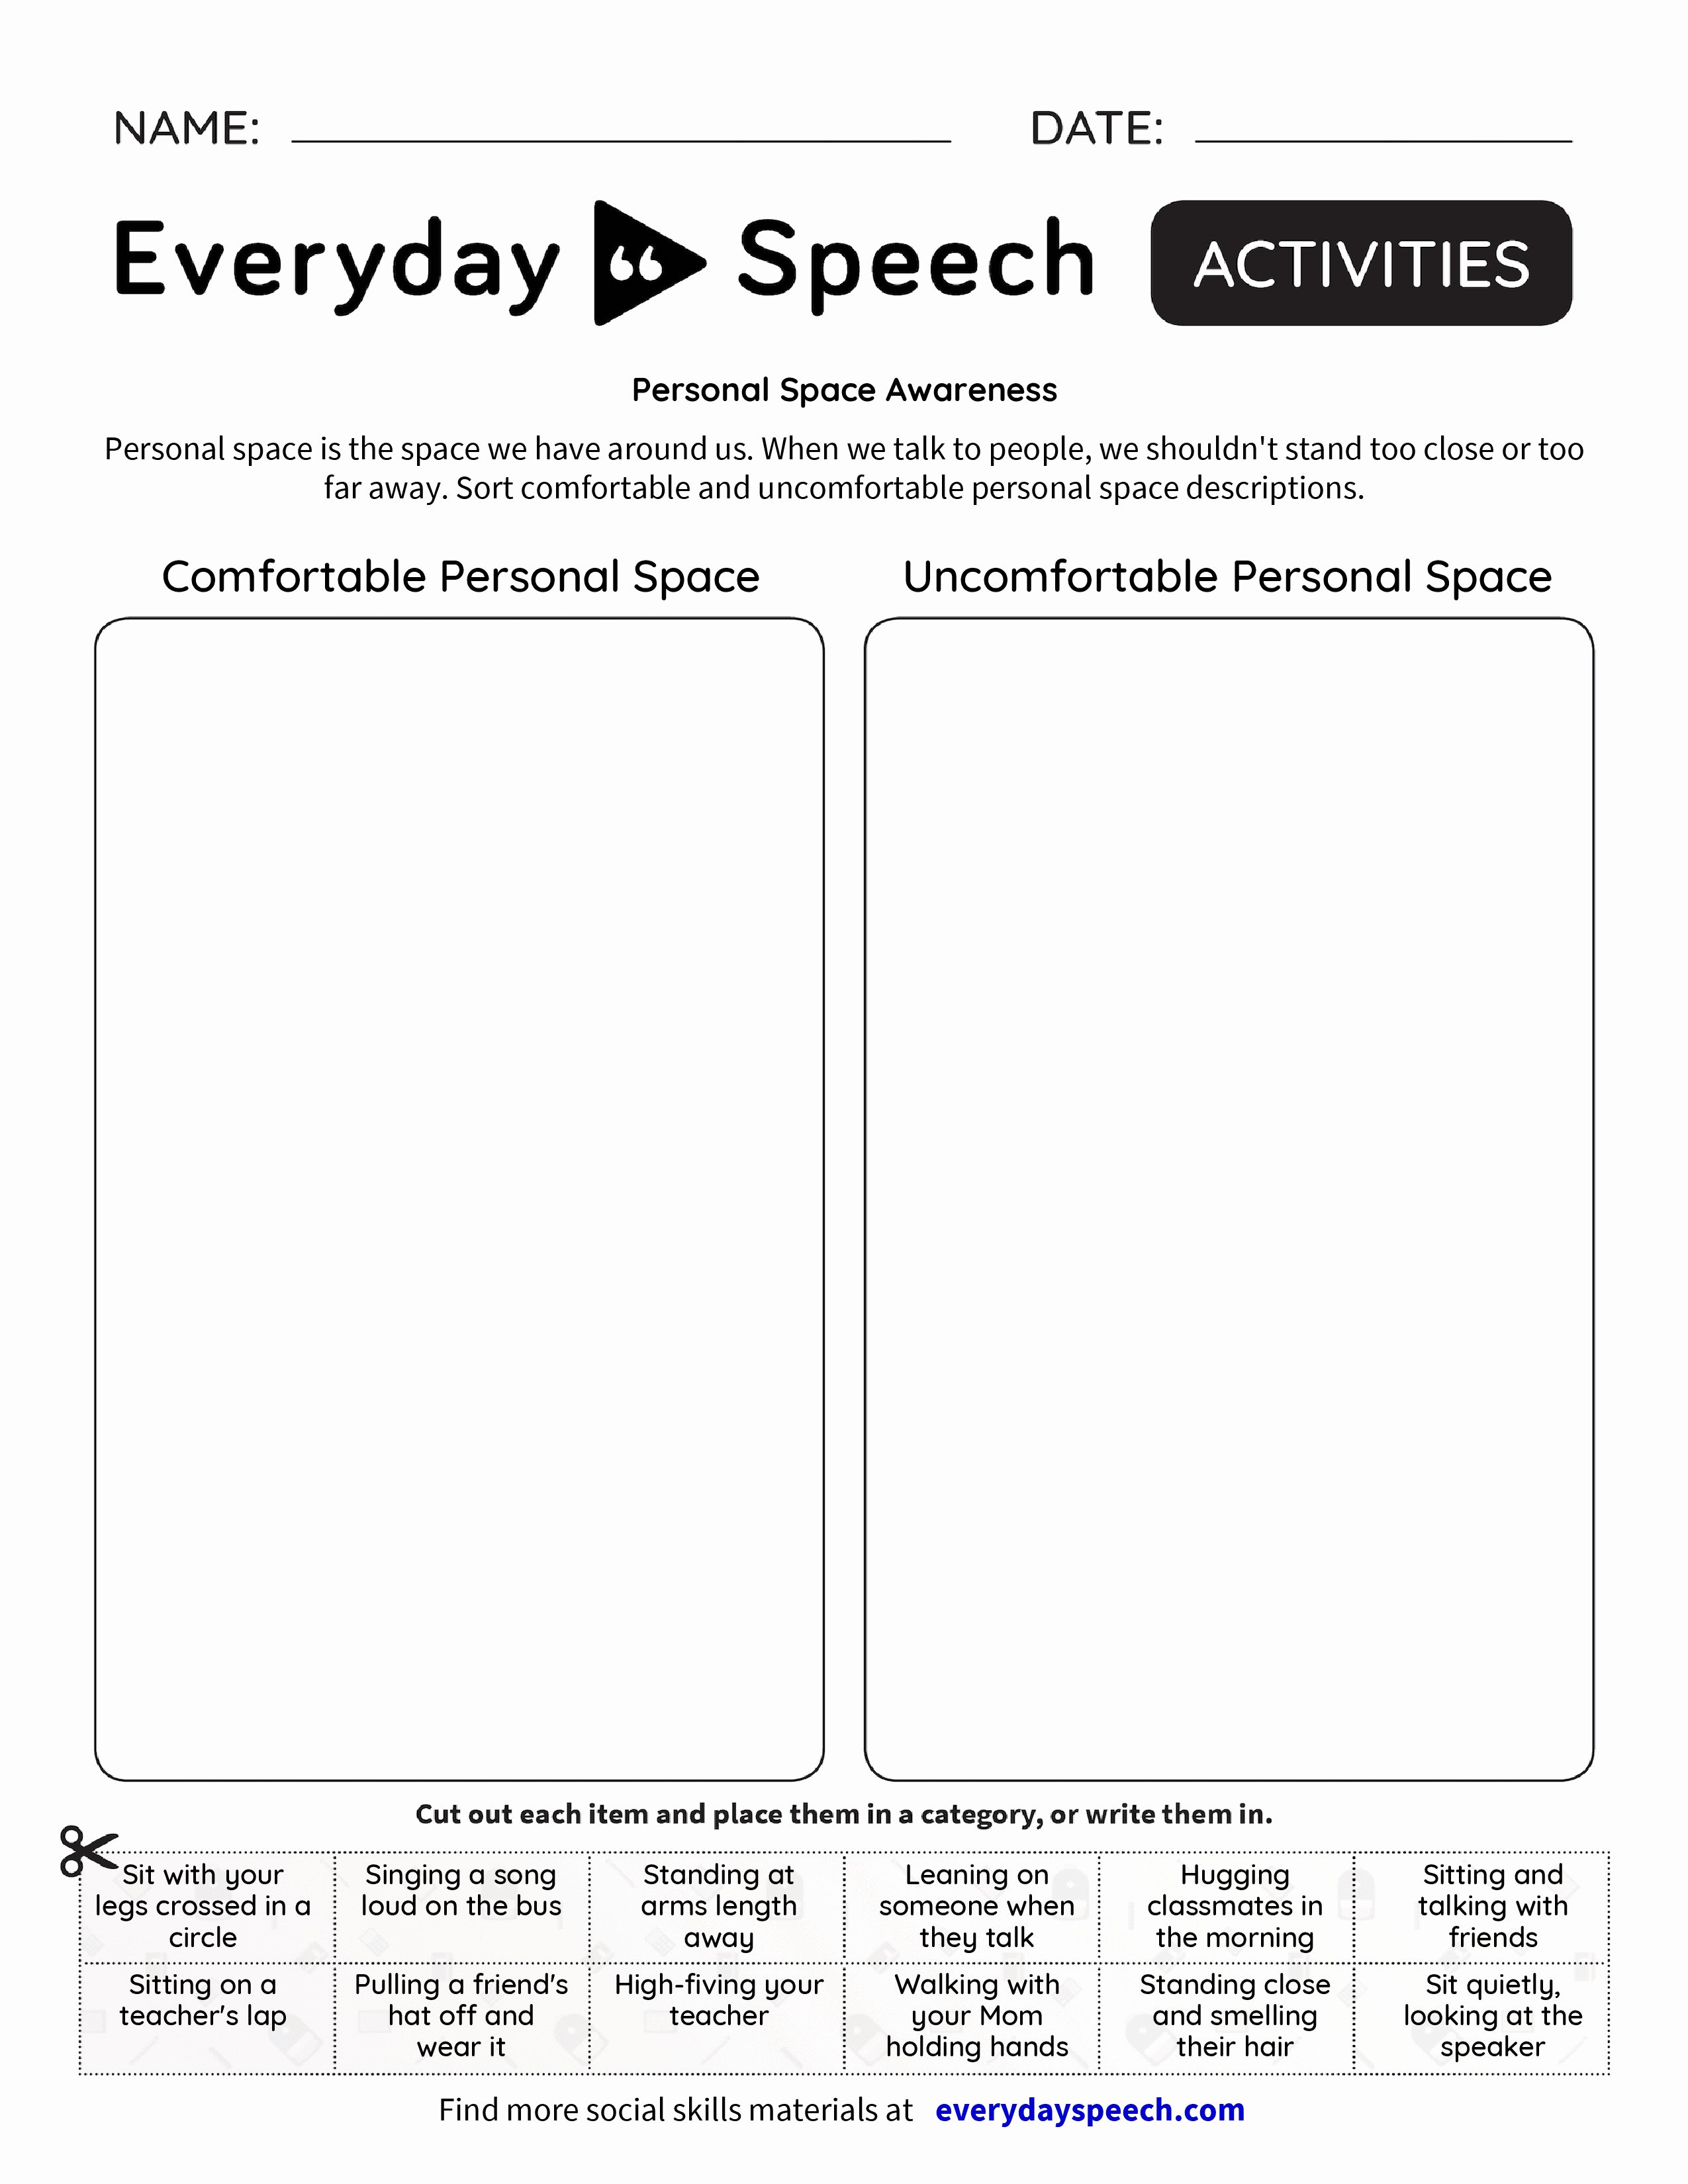 Respecting Others Property Worksheet Best Of Personal Space Worksheets Mindgearlabs